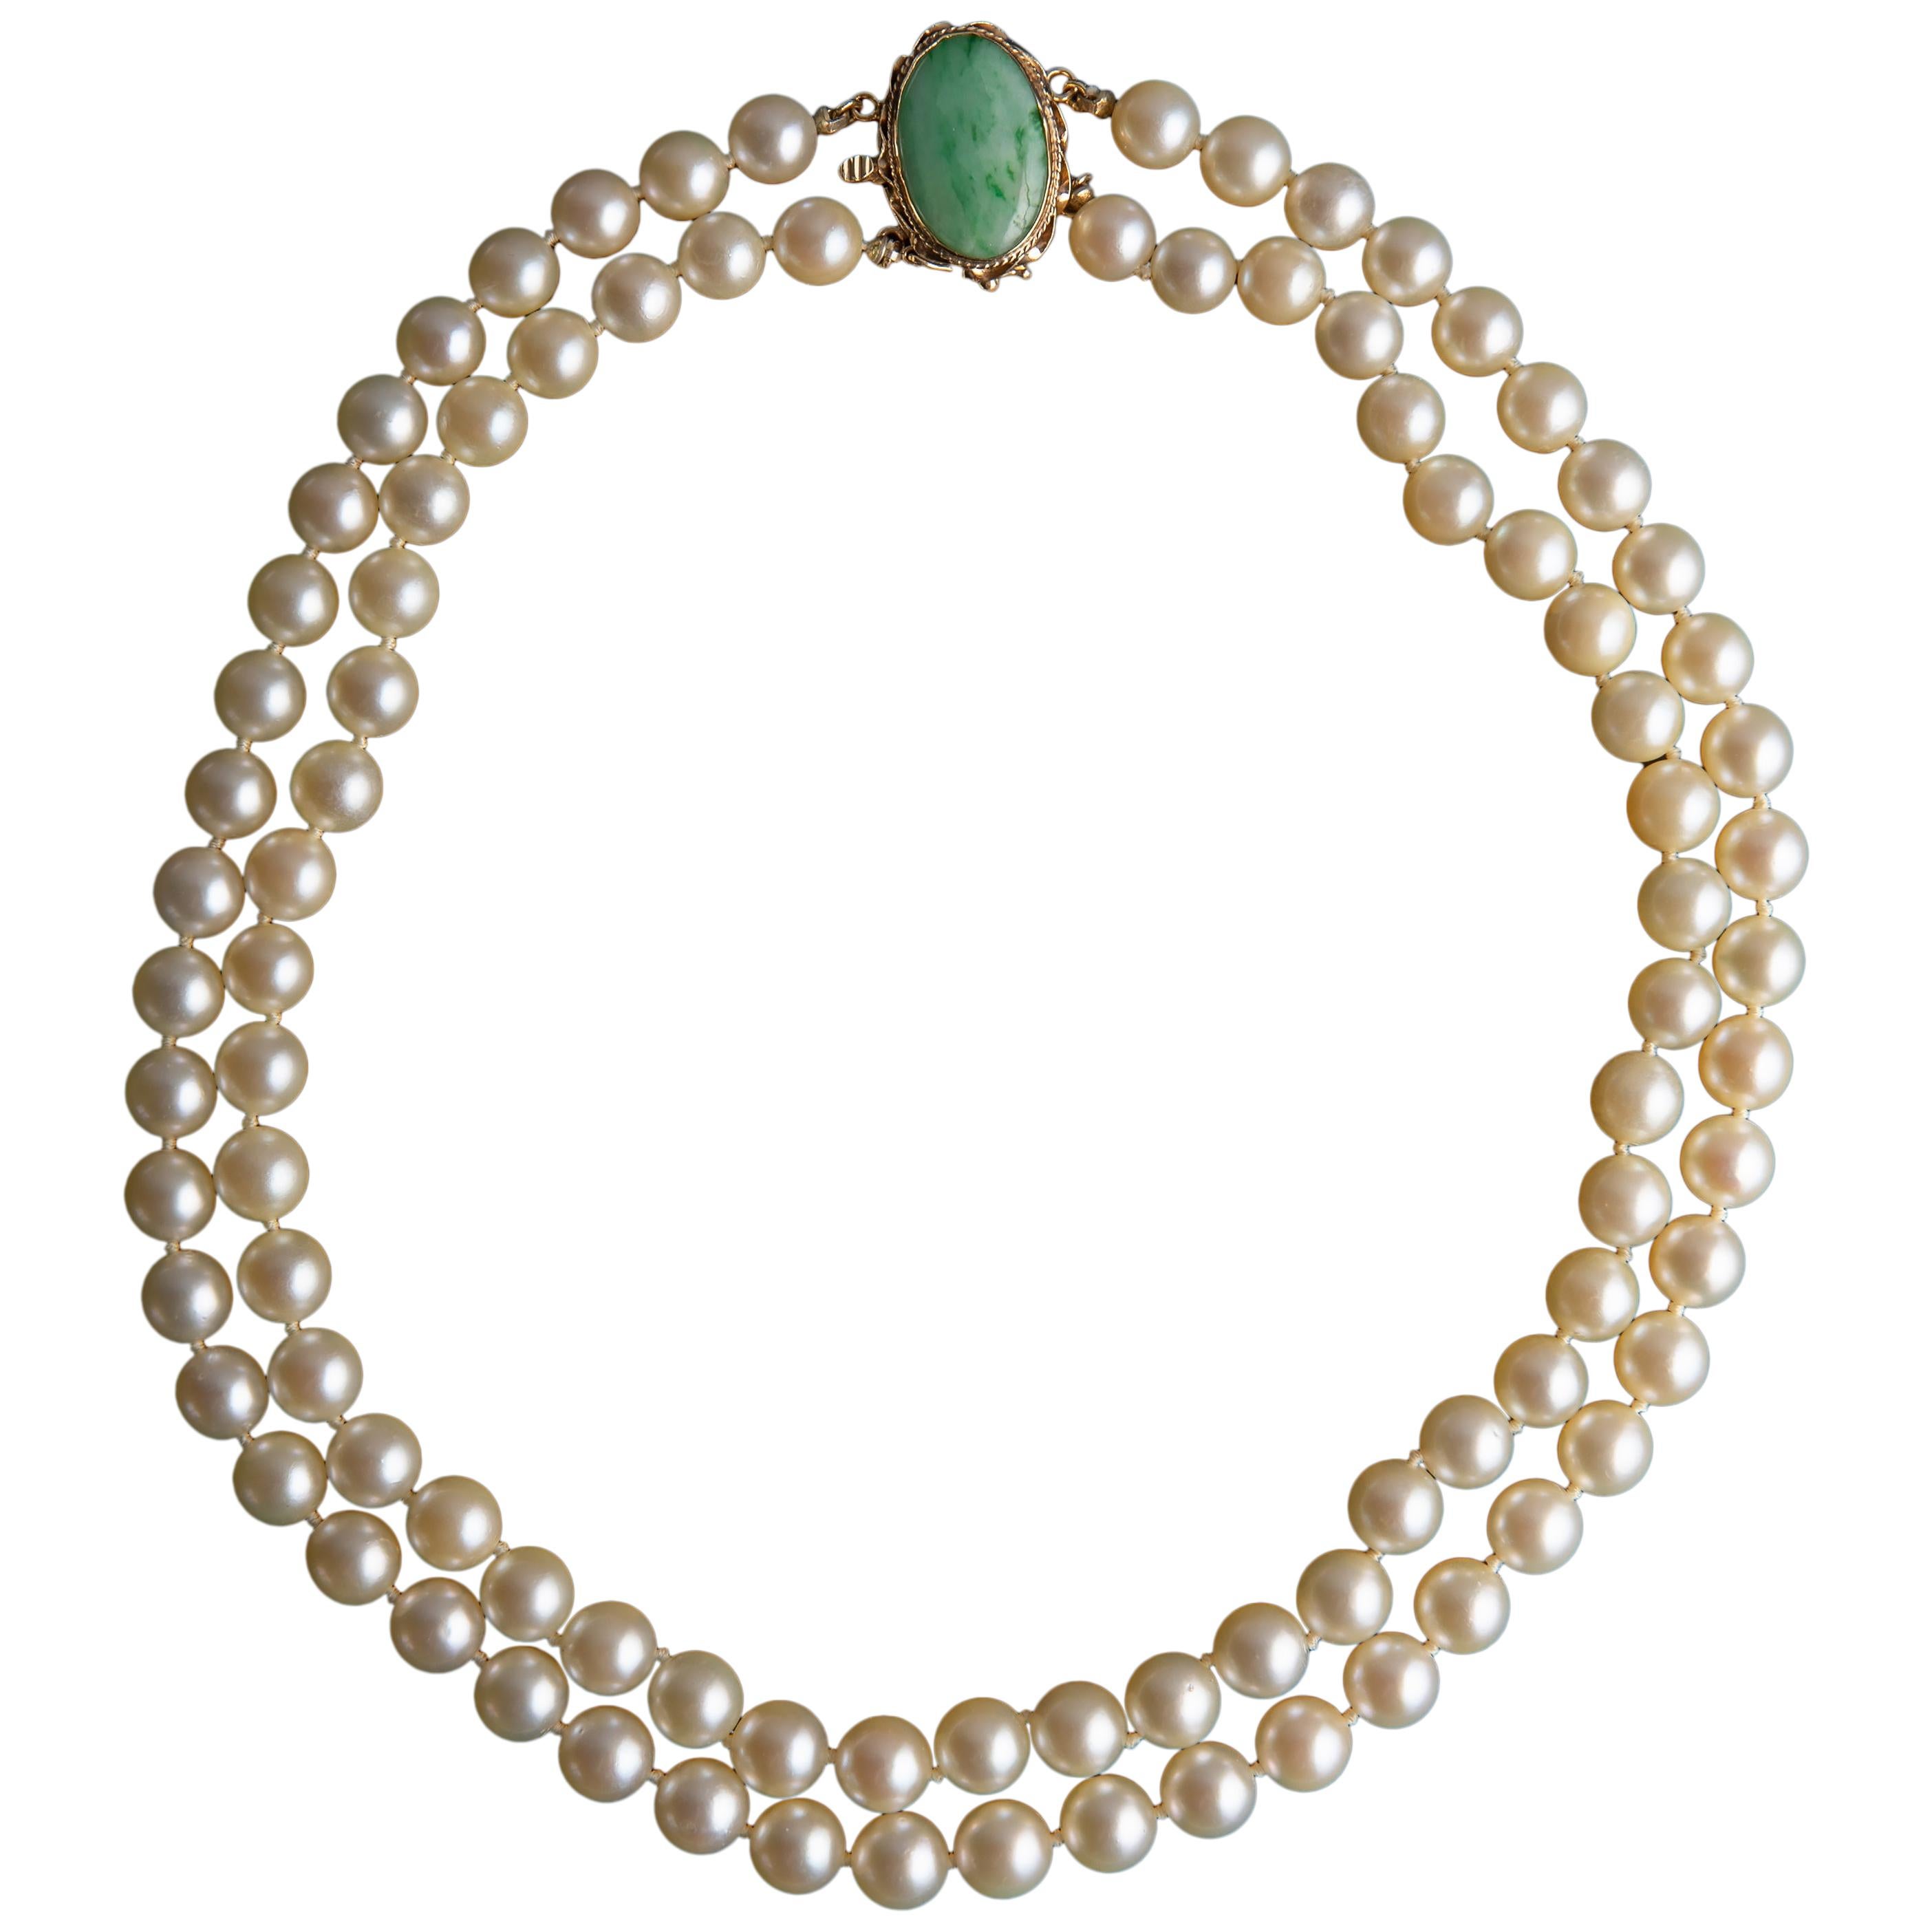 Double Strand Akoya Pearl Necklace with Burmese Jade Clasp Certified Untreated